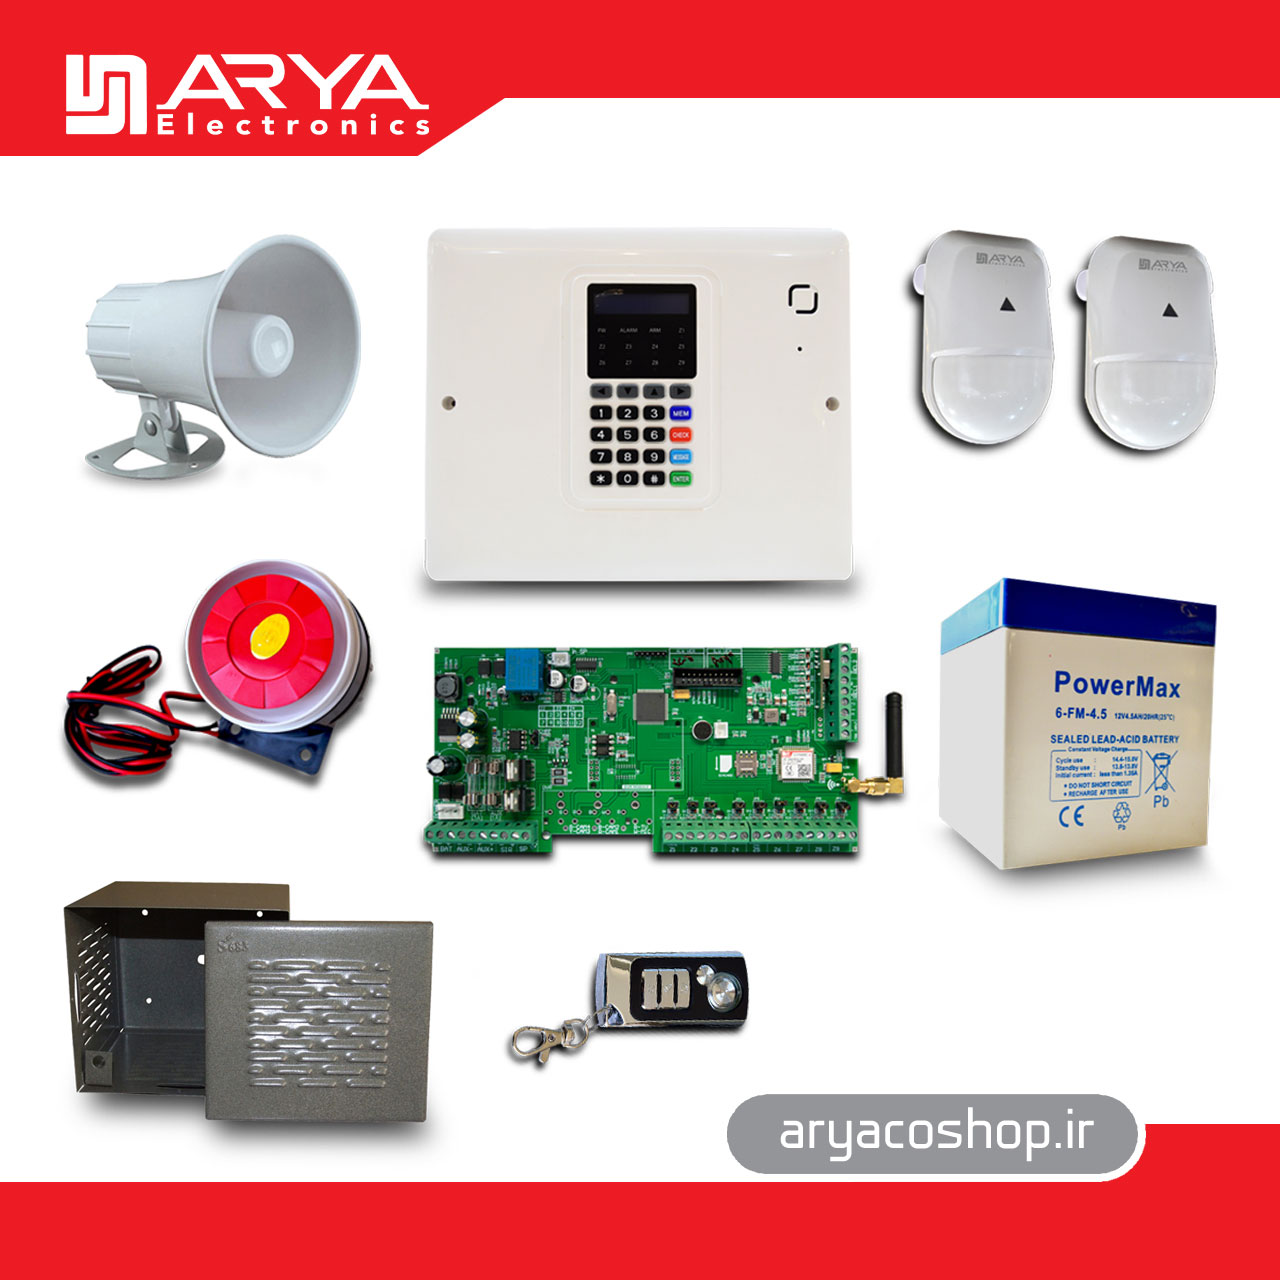 "HOME ALARM SYSTEM PACKAGE CENTRAL PANEL & ACCESSORIES"